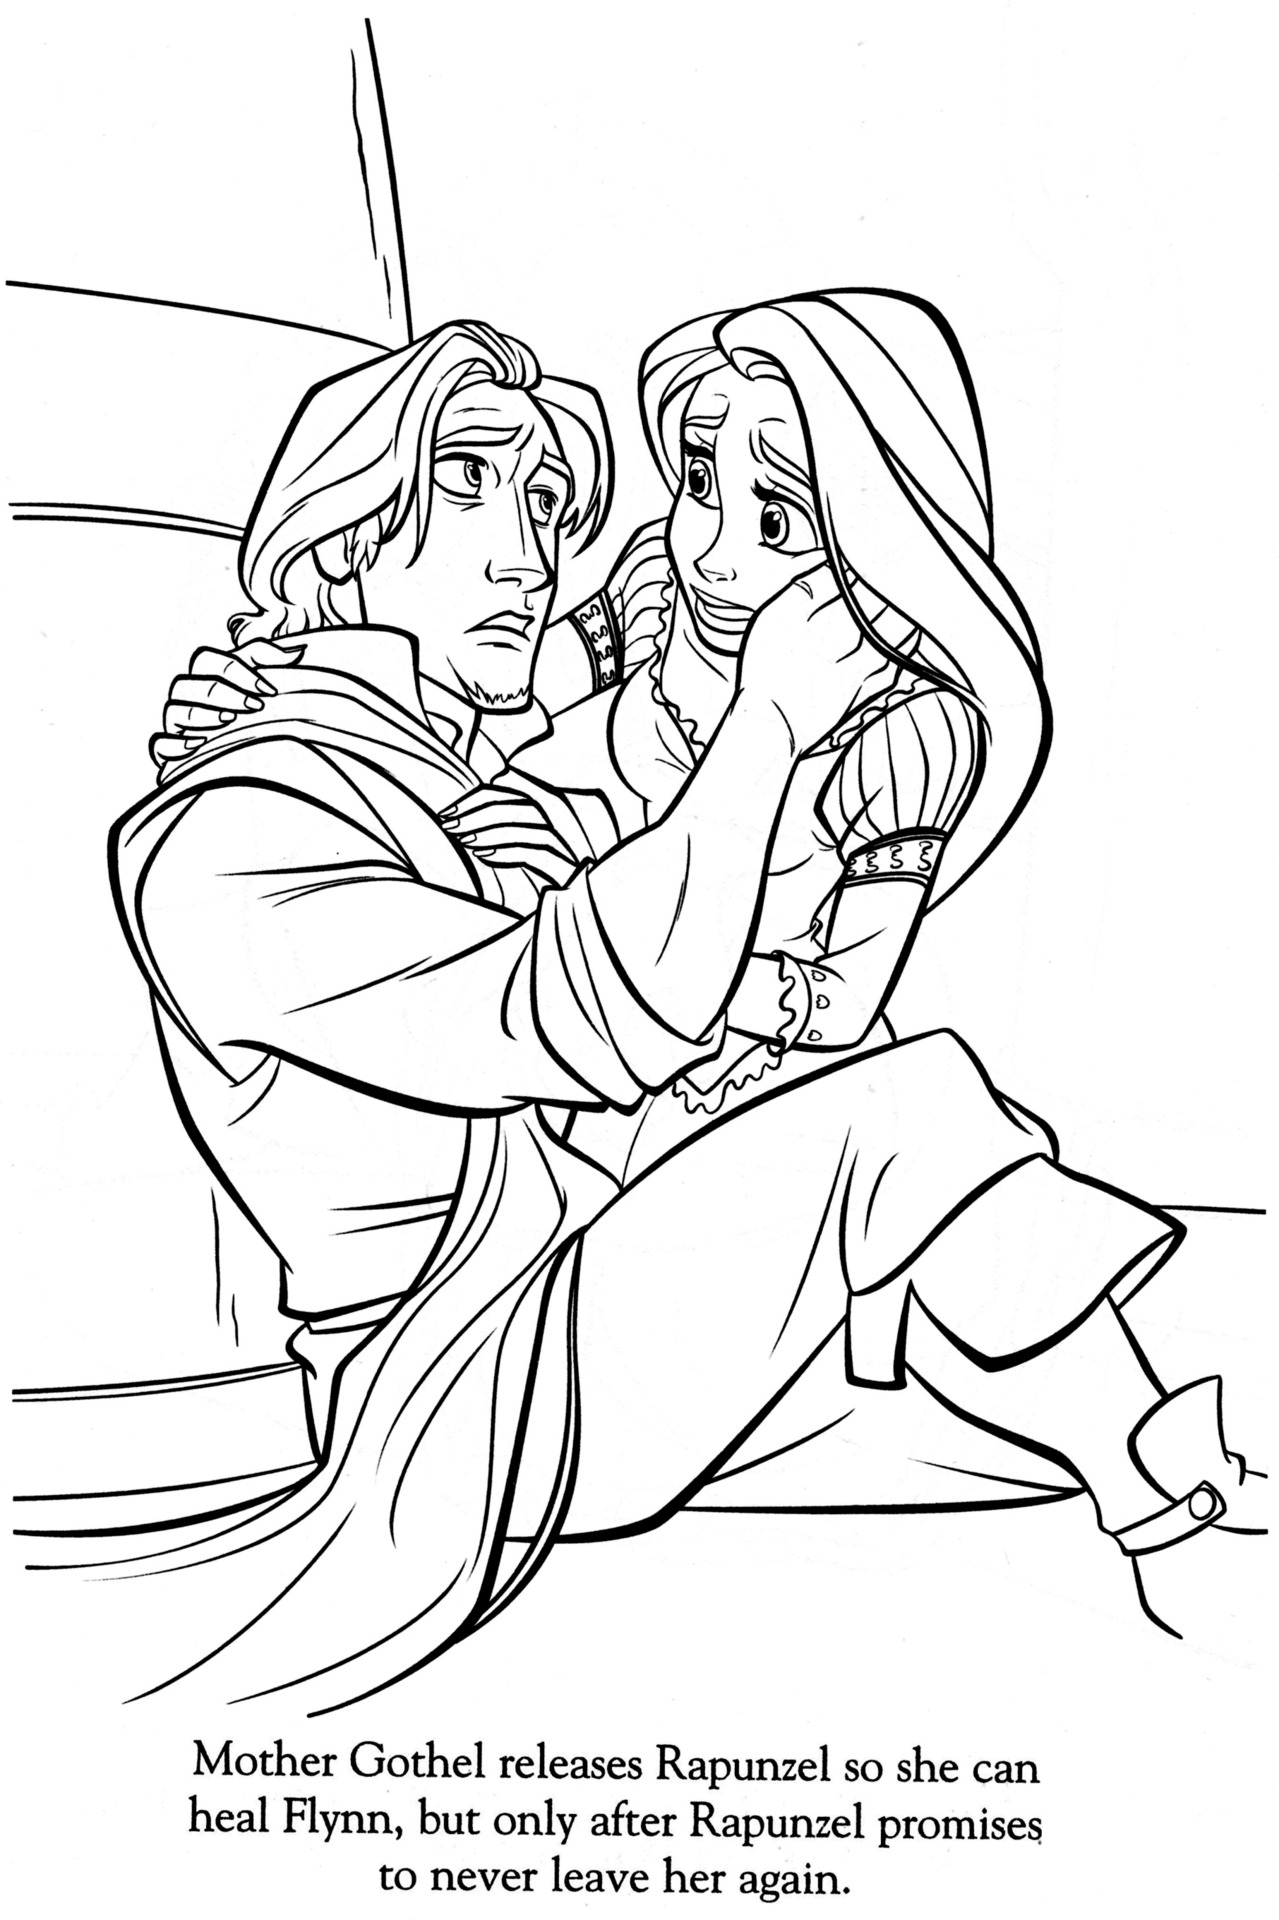 The Art of Tangled • The Tower Scene in Coloring Pages Links to larger...